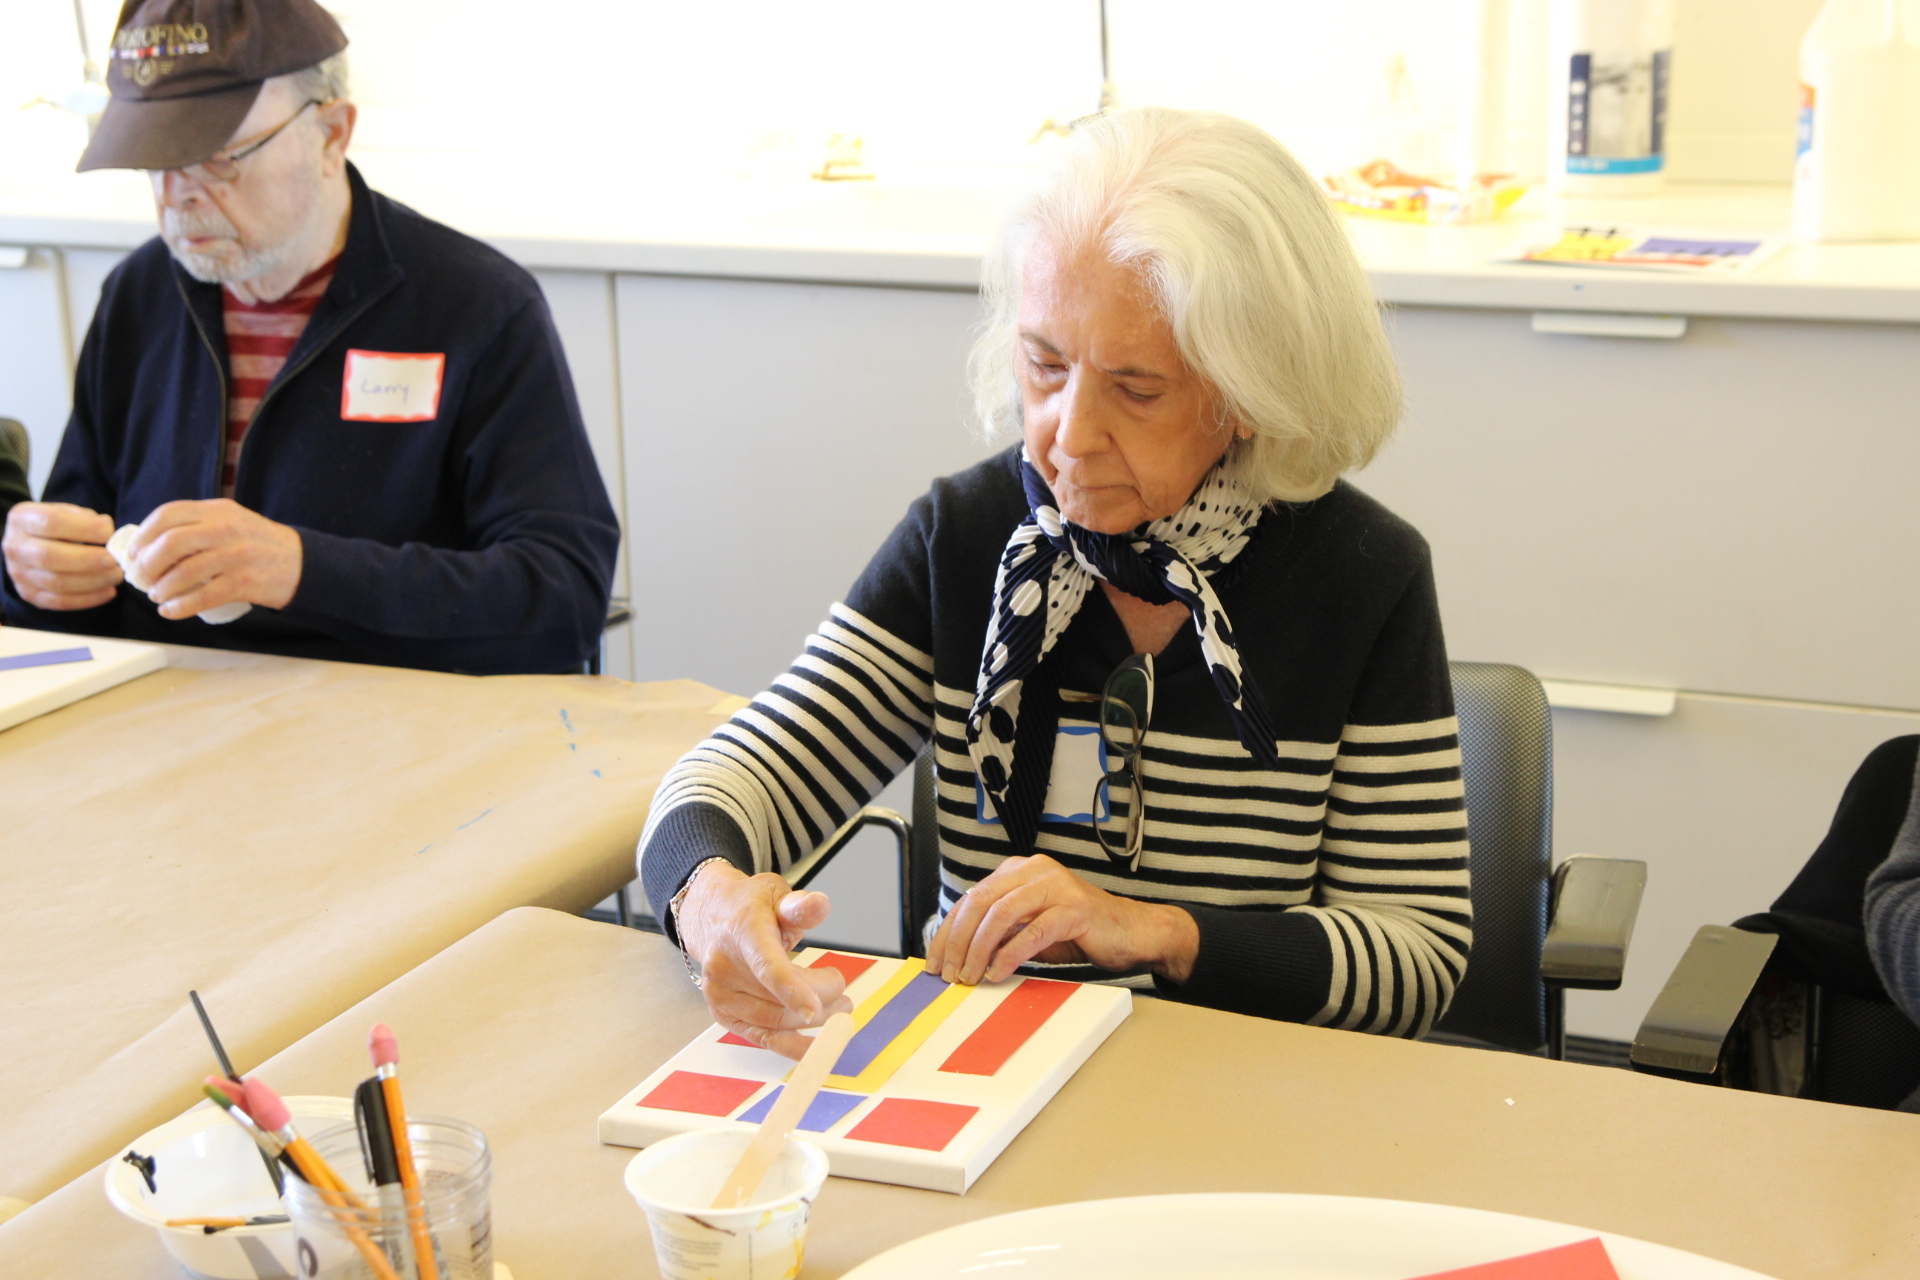 Artists participate in a Parkinson's collage workshop at the Parrish Art Museum in 2019. JILLIAN BOCK